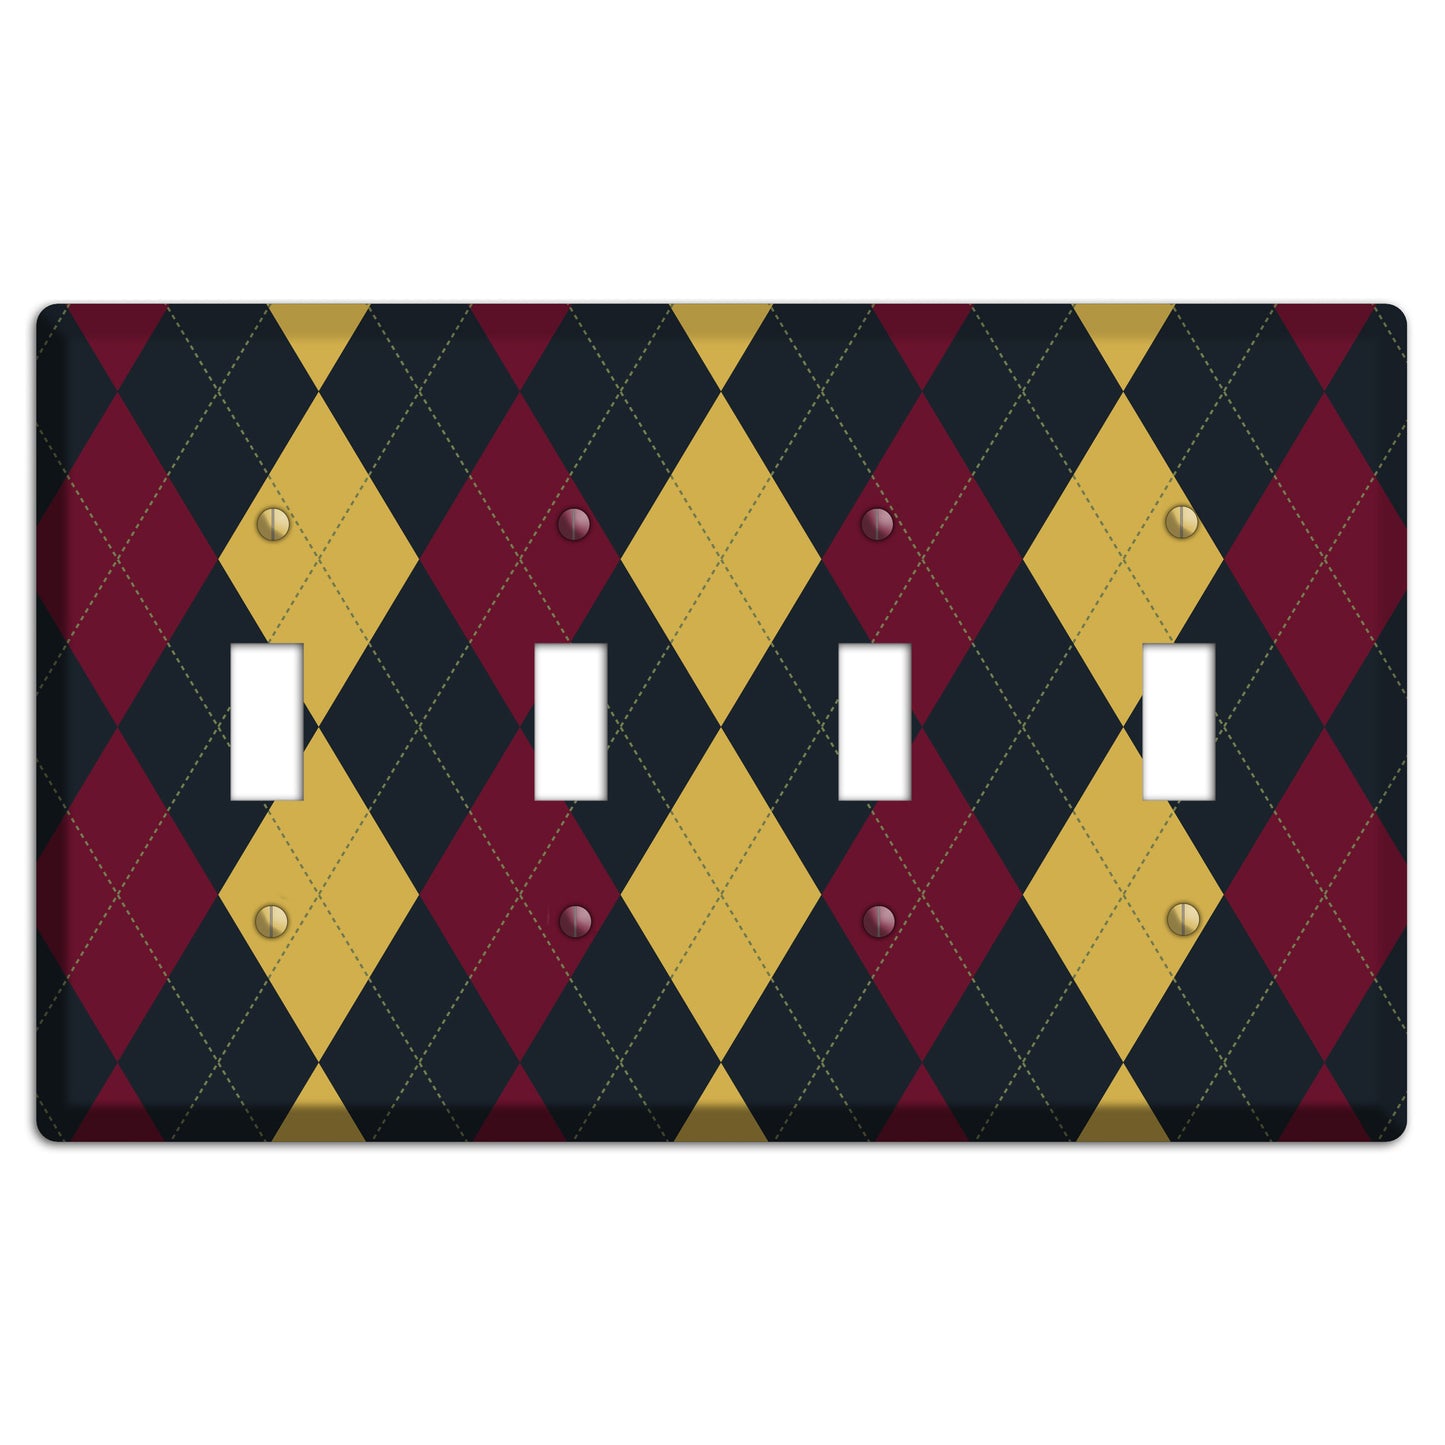 Deep Red and Yellow Argyle 4 Toggle Wallplate